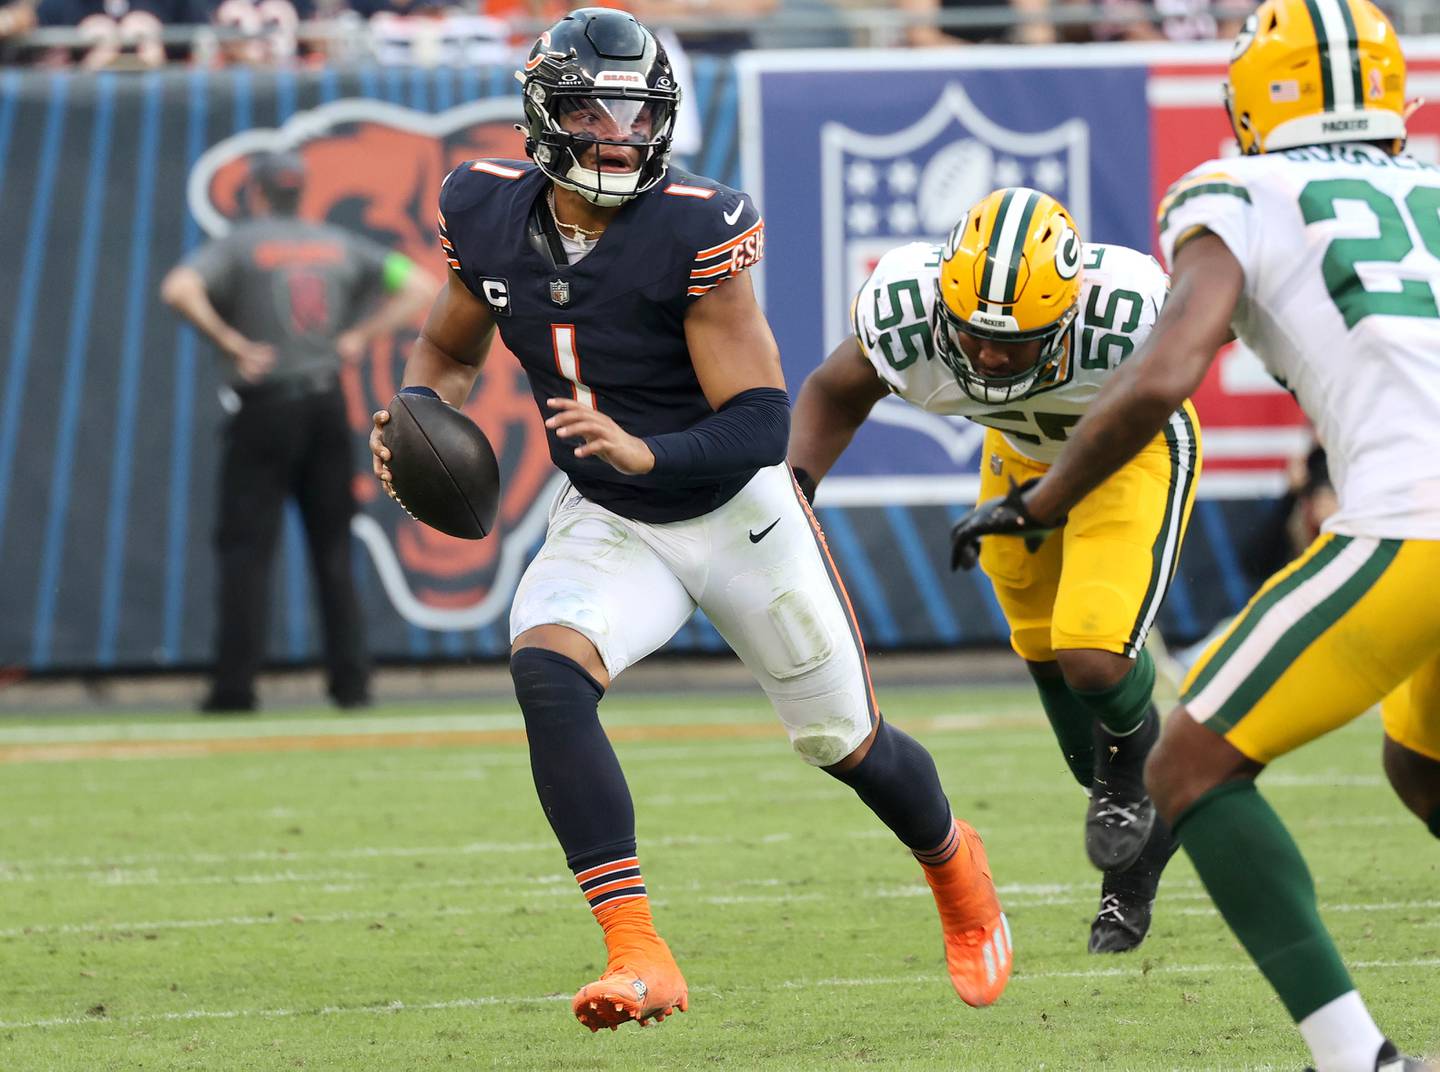 Chicago Bears quarterback Justin Fields runs away from the pass rush of Green Bay Packers linebacker Kingsley Enagbare during their game Sunday, Sept. 10, 2023, at Soldier Field in Chicago.